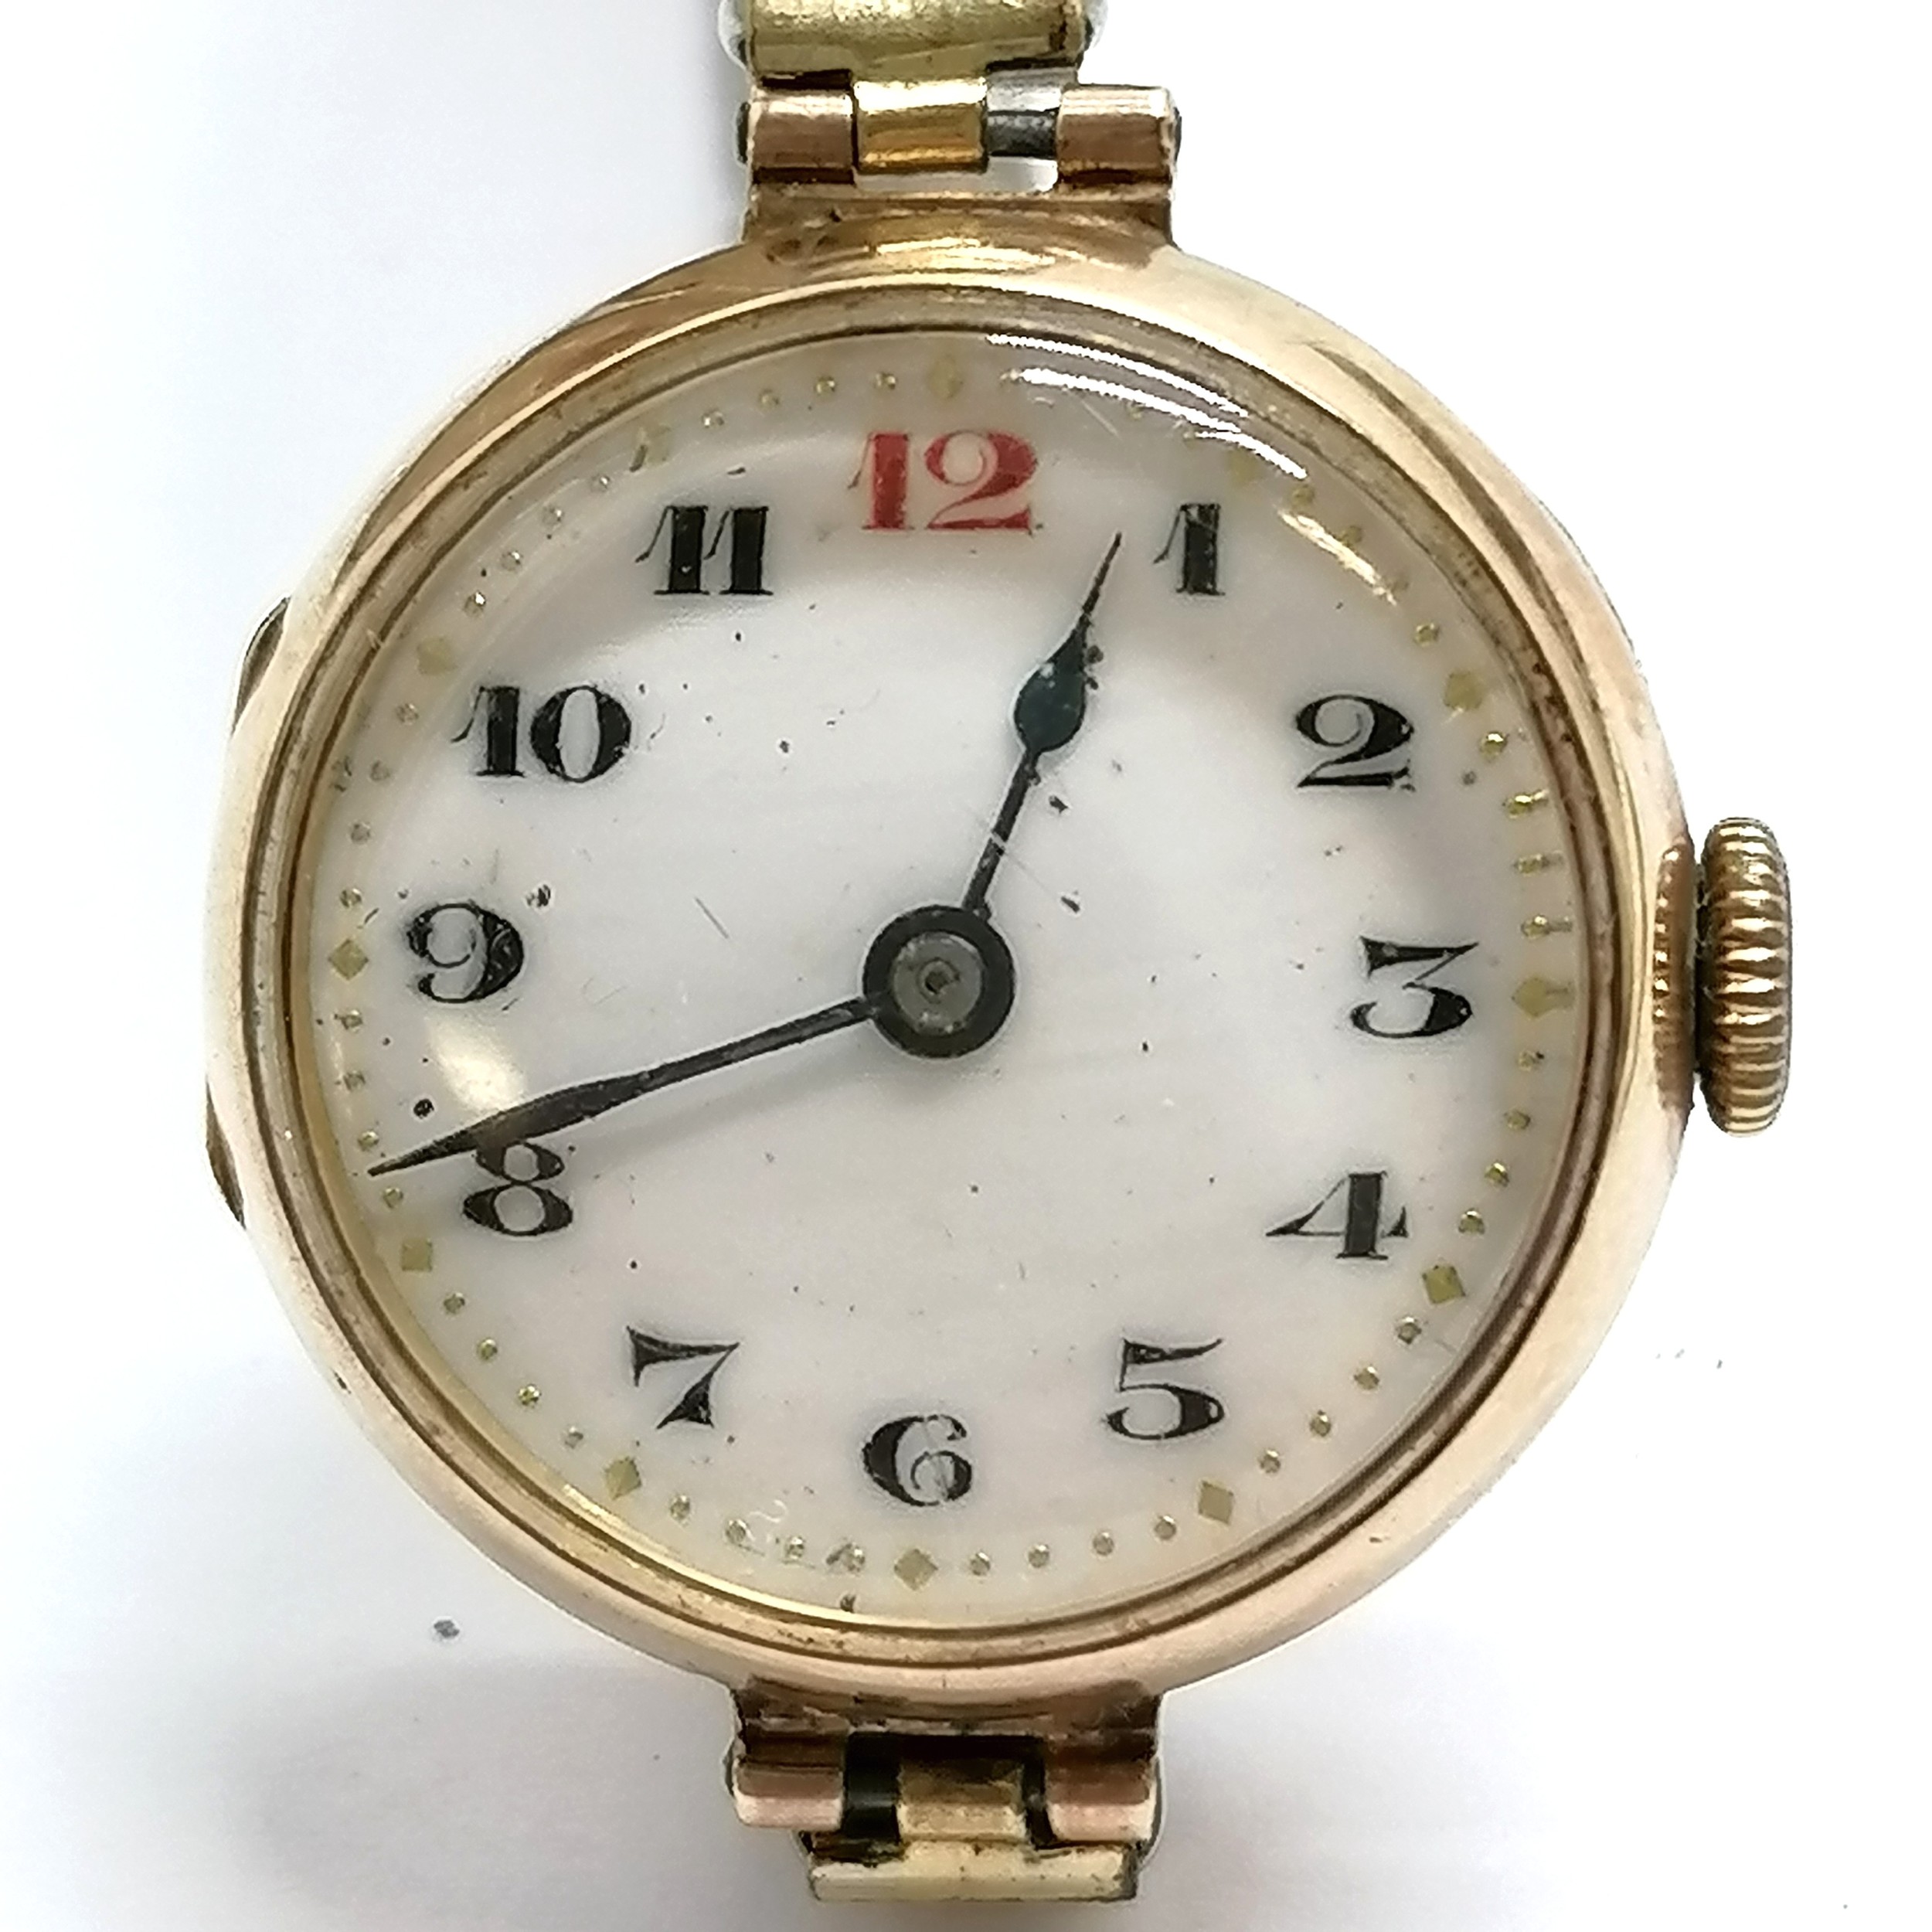 Breguet HSPG swiss made (marked Levantine A1 marked cog) 9ct gold 20mm cased wristwatch in - Image 3 of 4